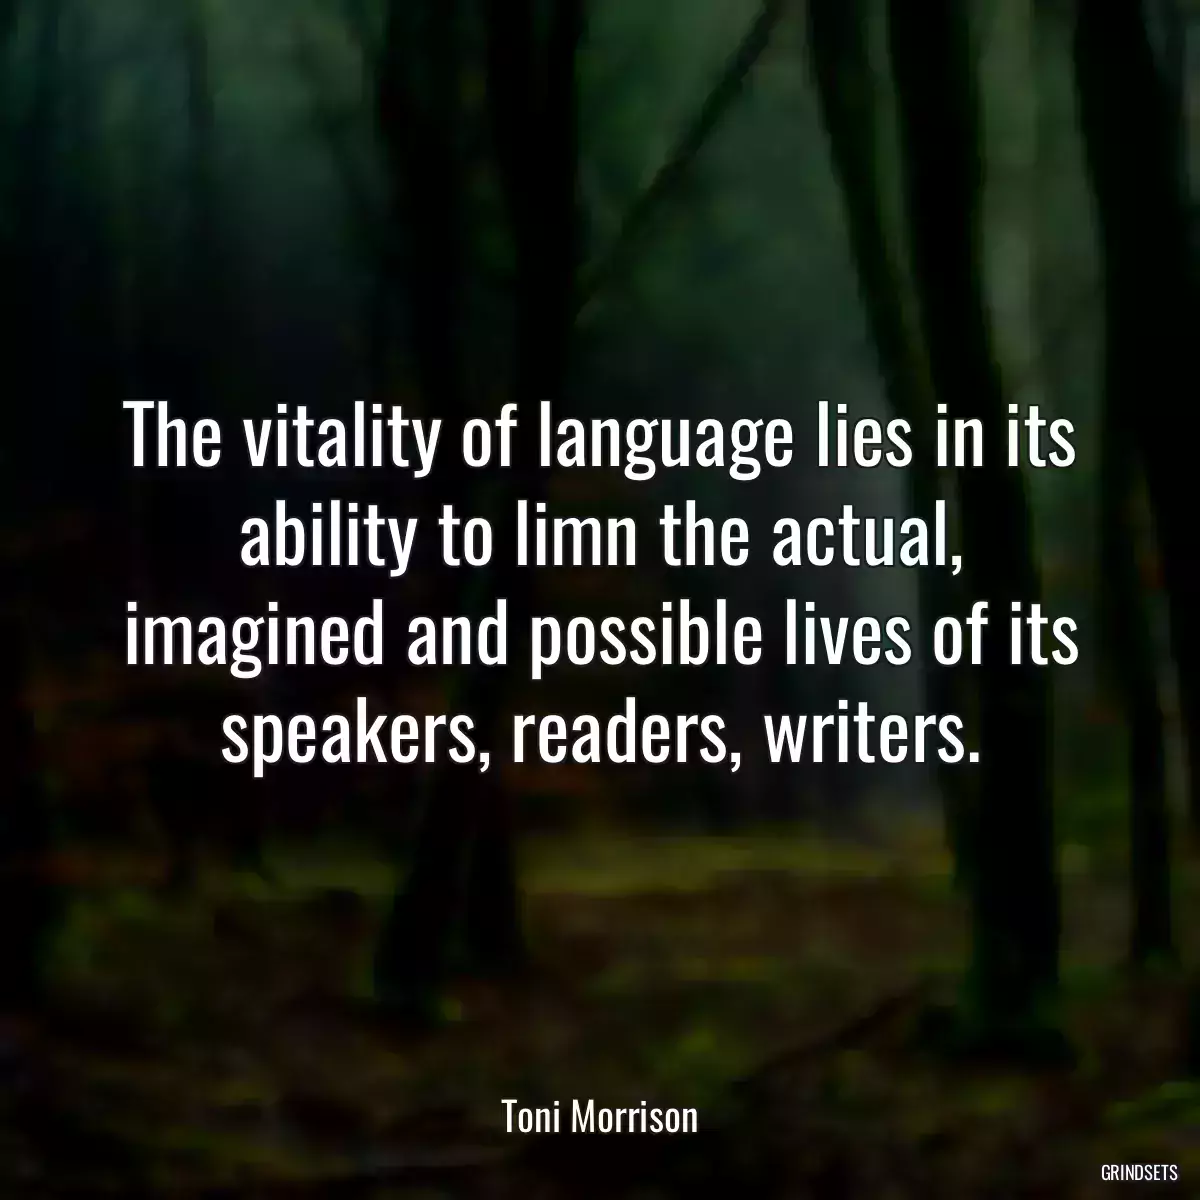 The vitality of language lies in its ability to limn the actual, imagined and possible lives of its speakers, readers, writers.